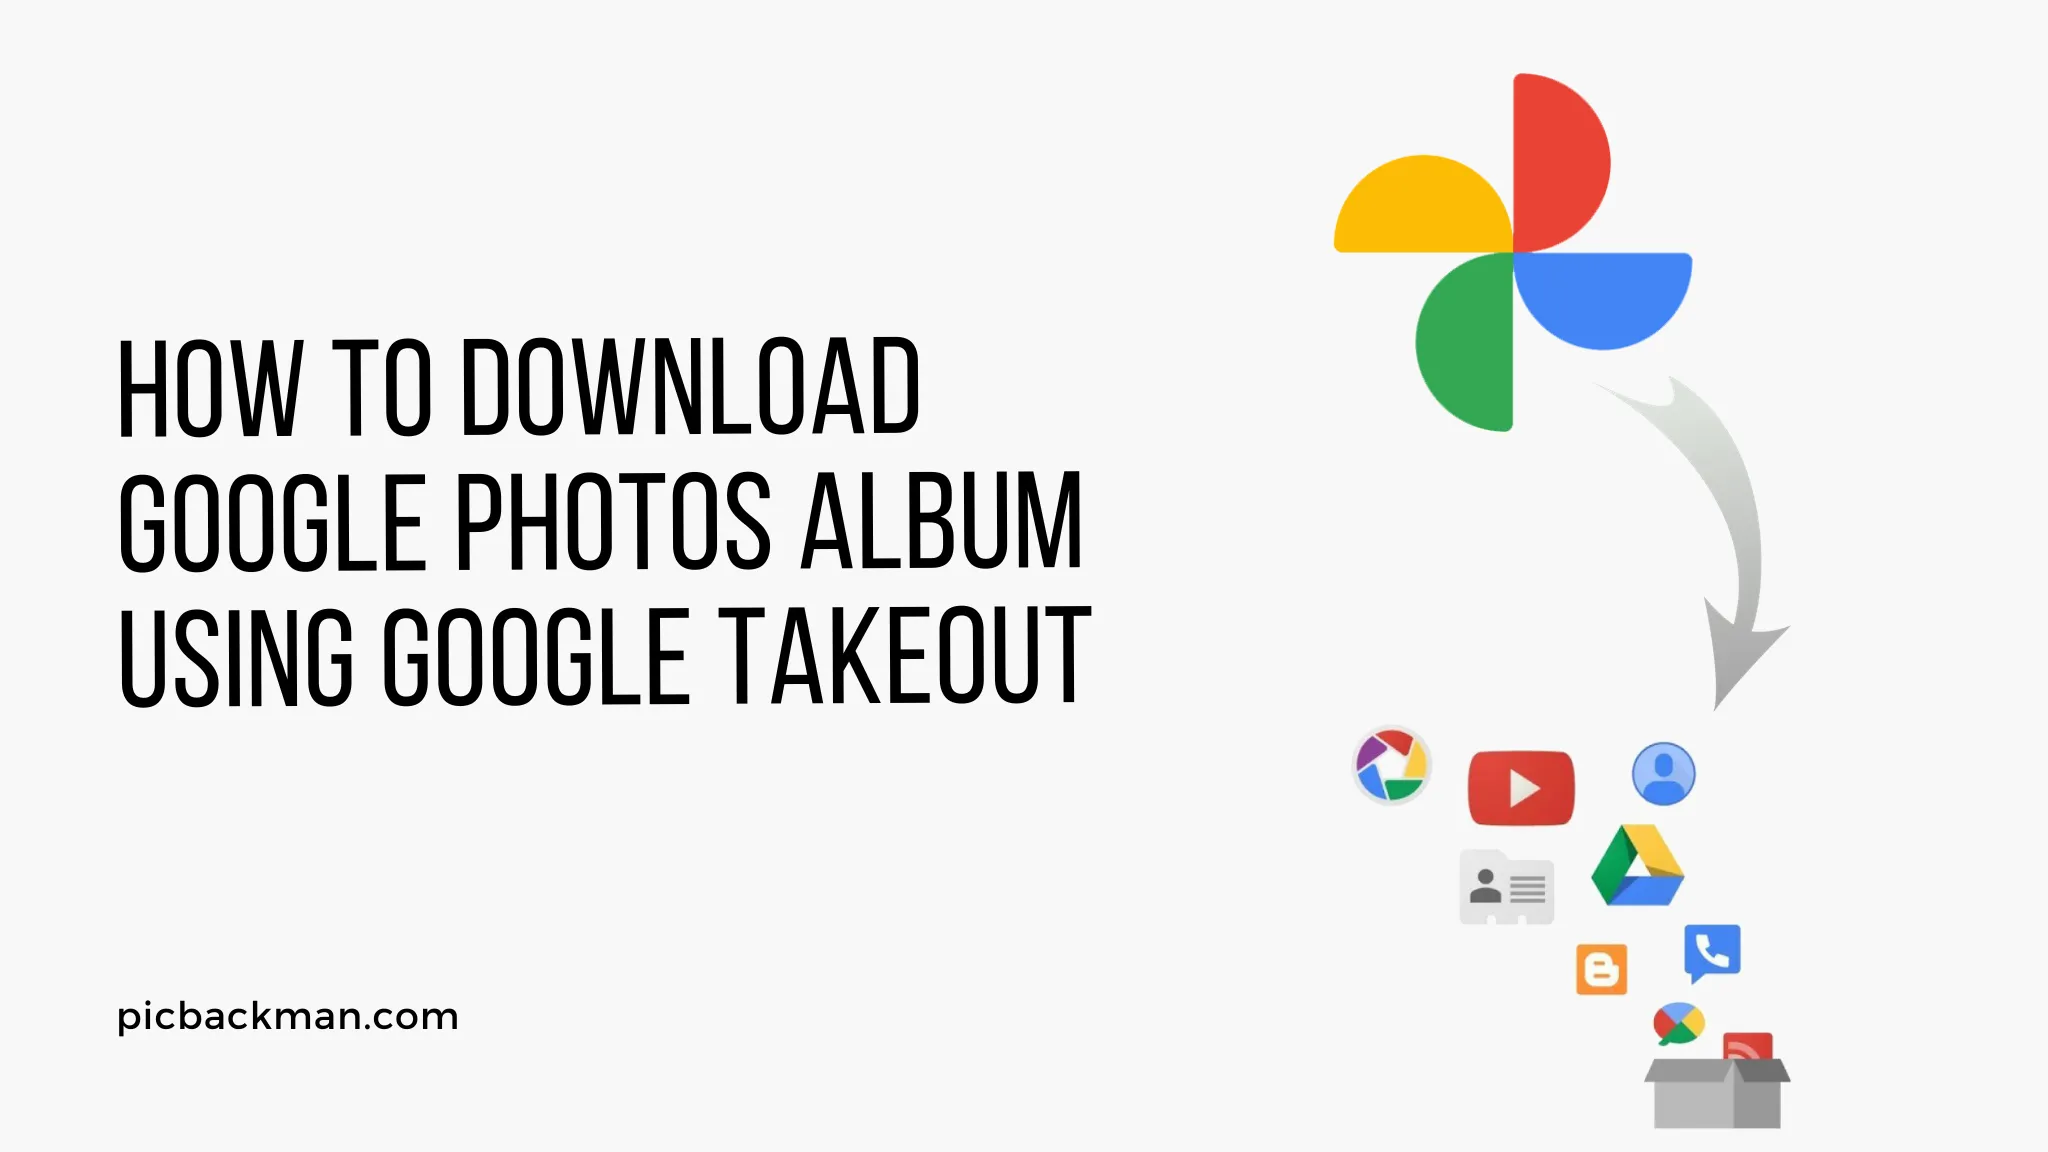 How to download Google Photos album using Google Takeout